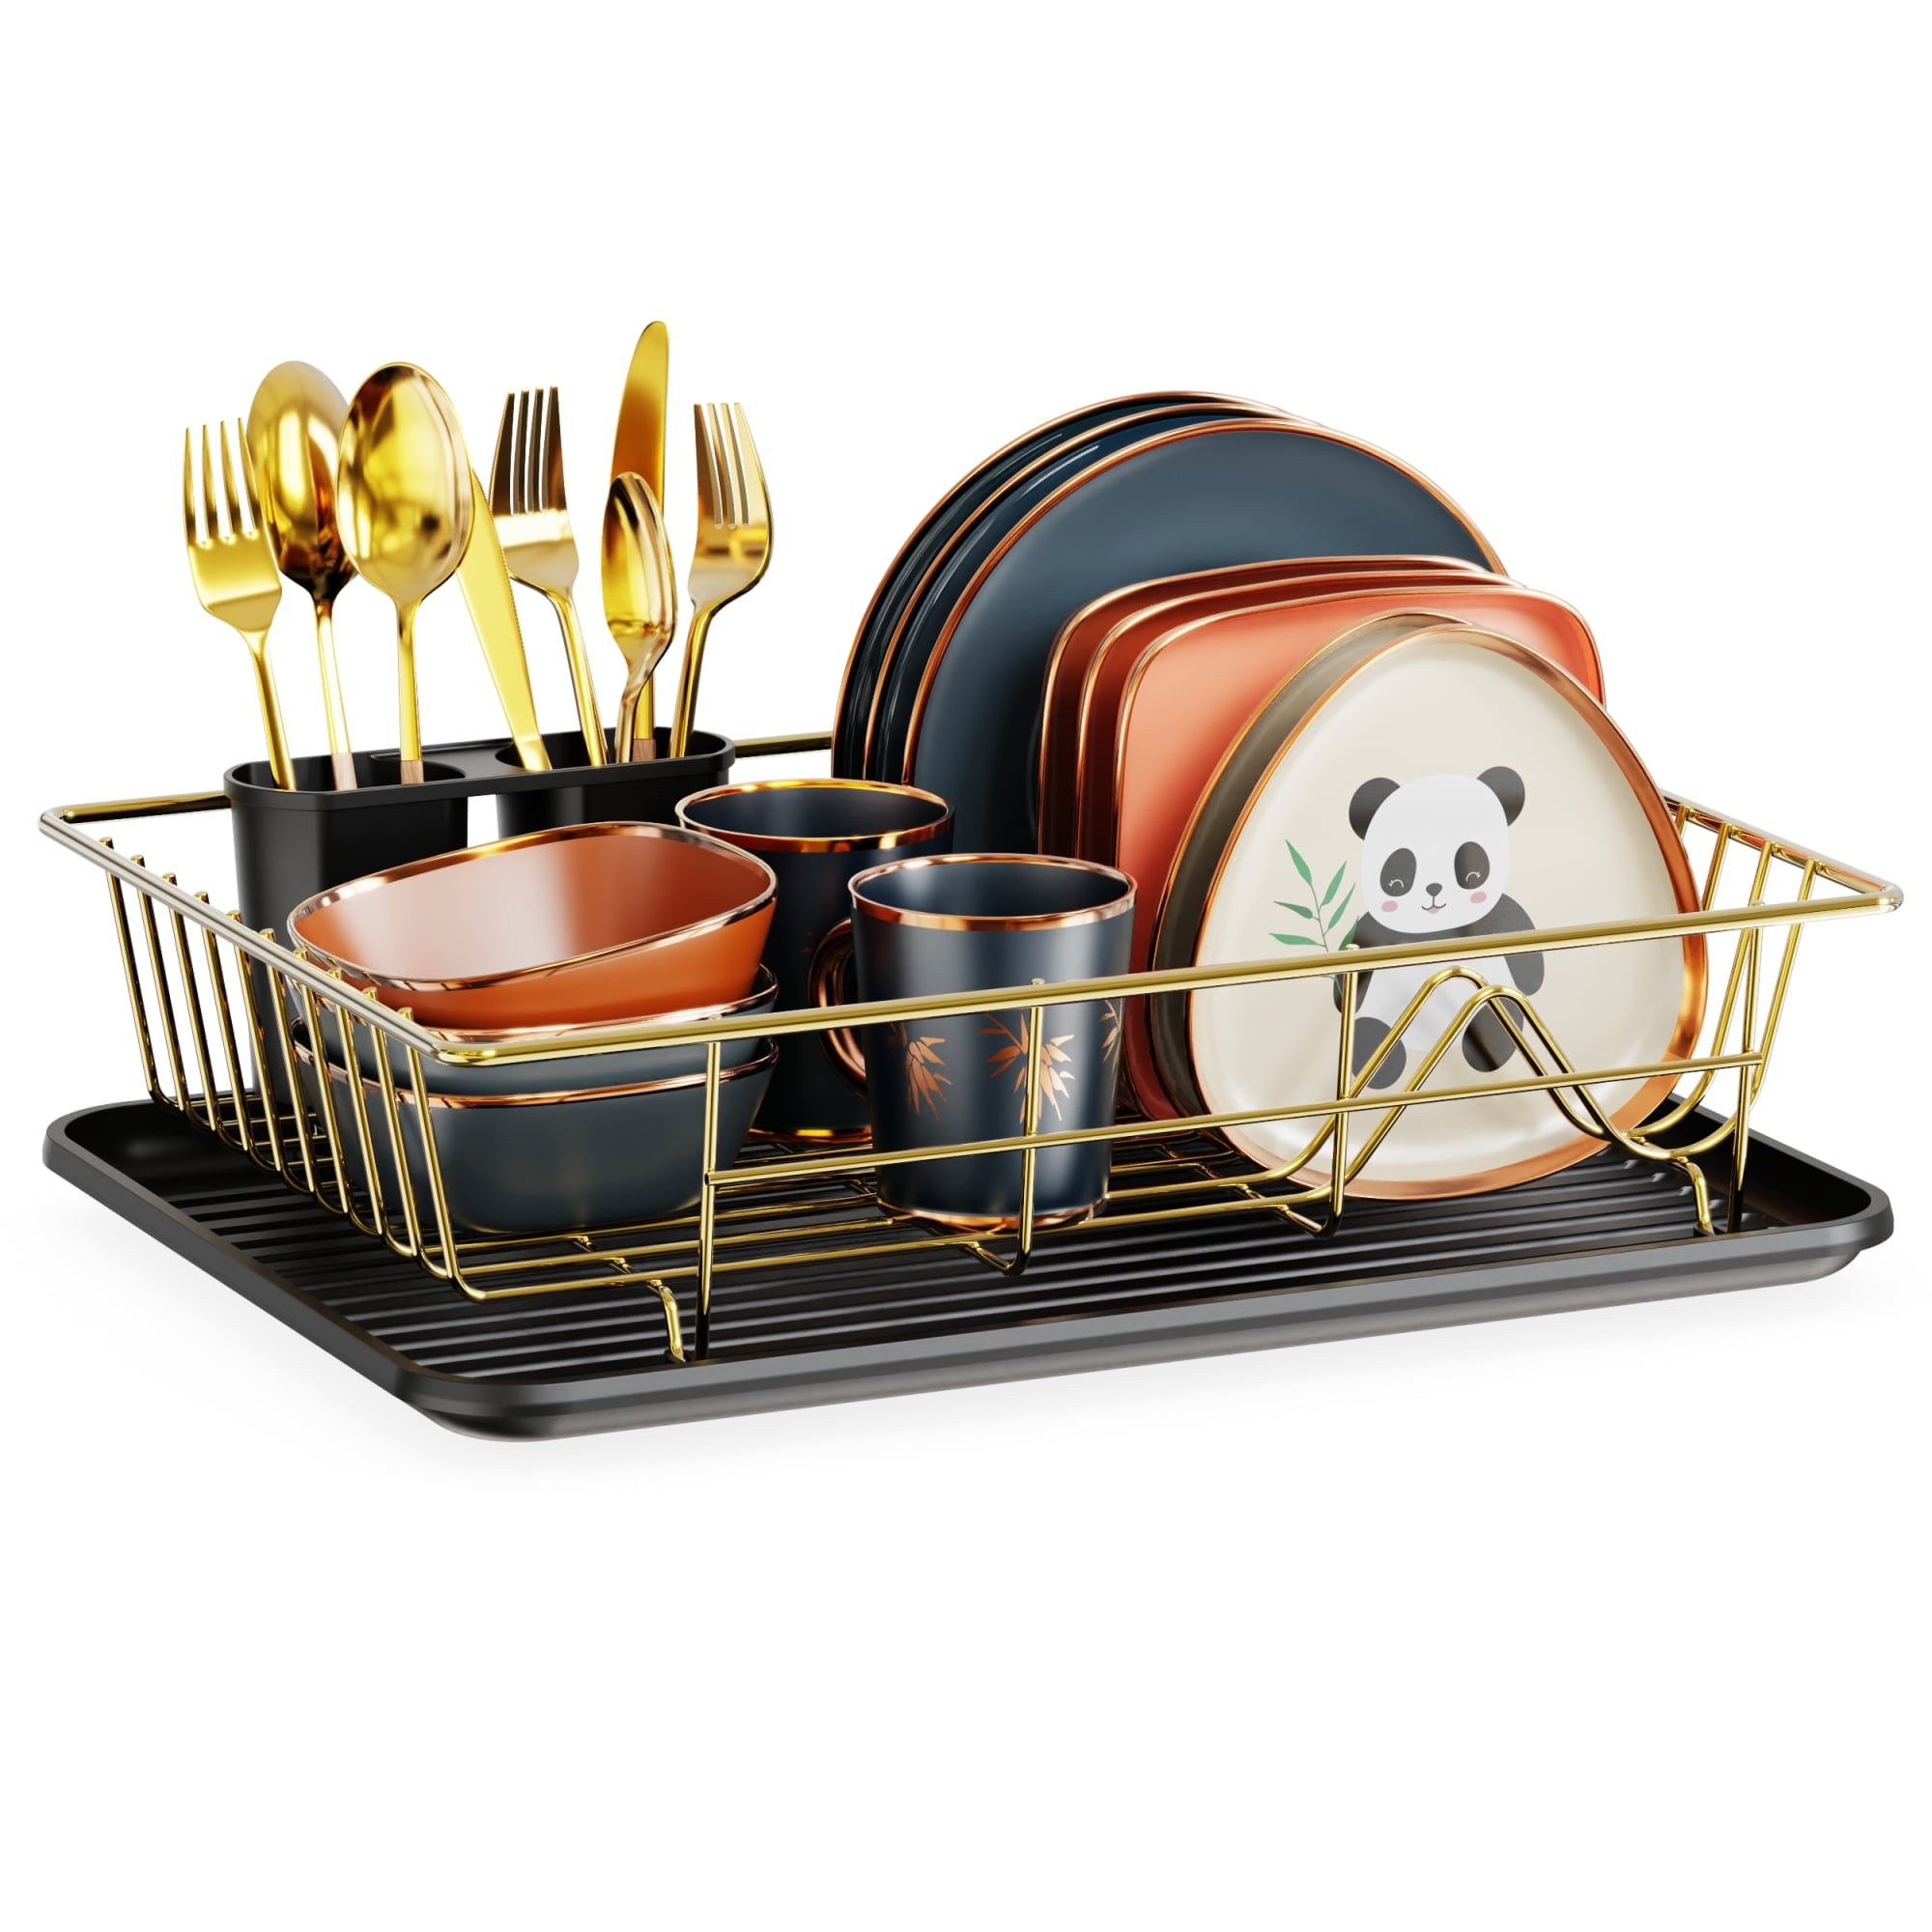 Dish Drying Rack,Dish Drainer with Tray Utensil Black/Golden - Bed